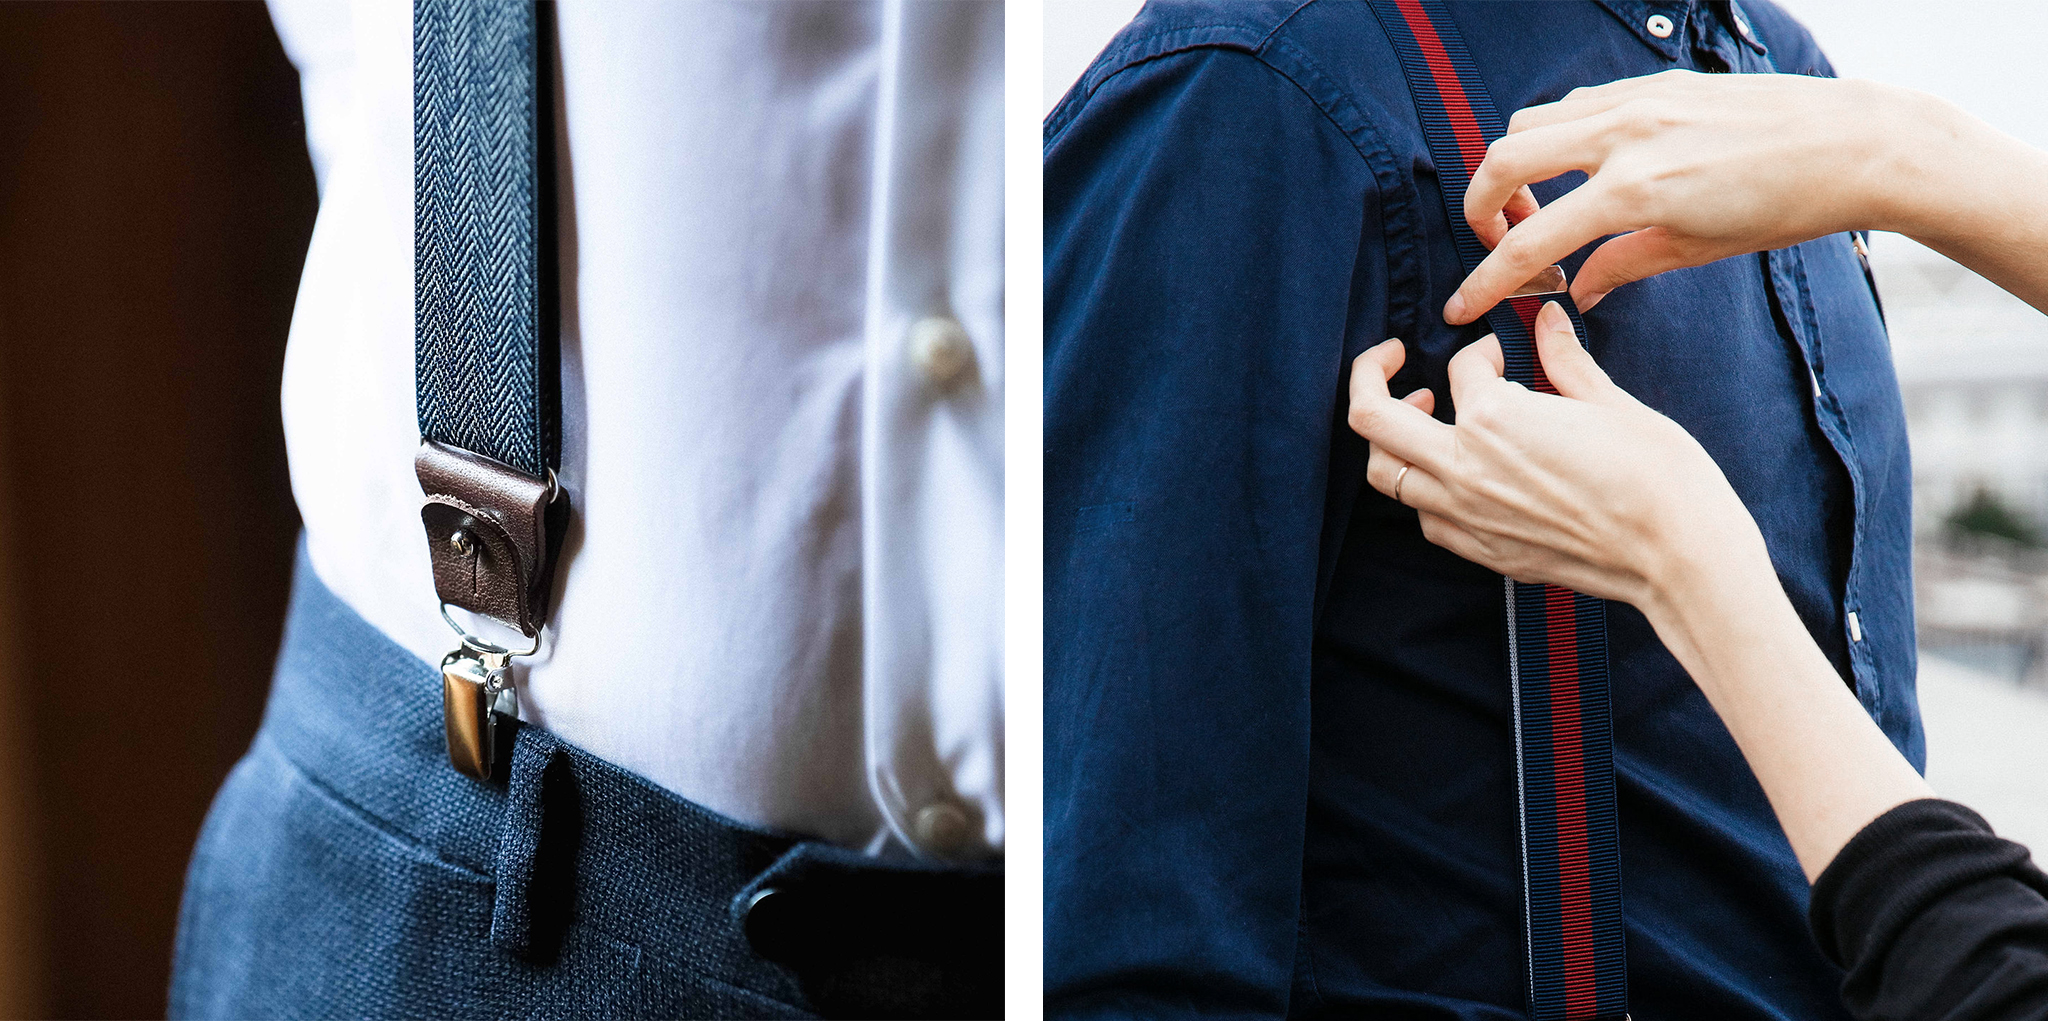 How Tight Should You Wear Your Suspenders?